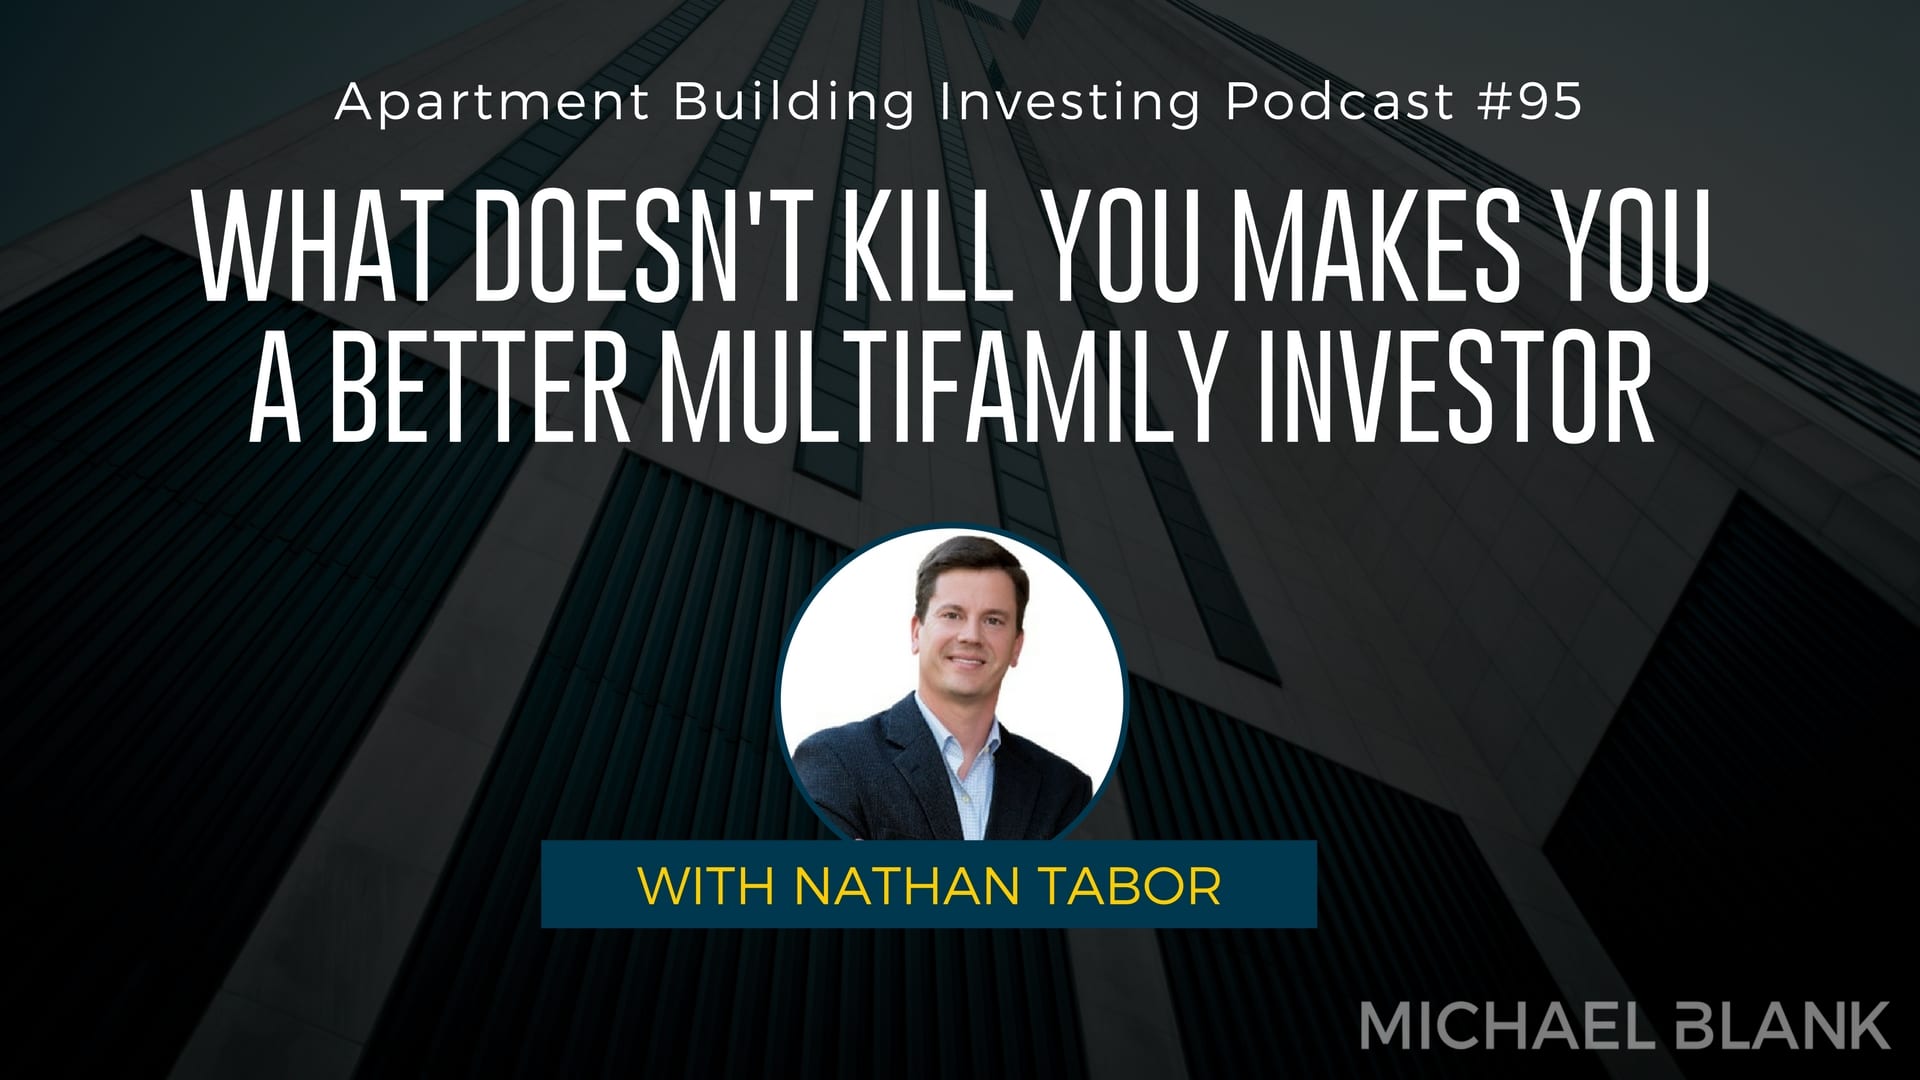 MB 095: What Doesn’t Kill You Makes You a Better Multifamily Investor With Nathan Tabor